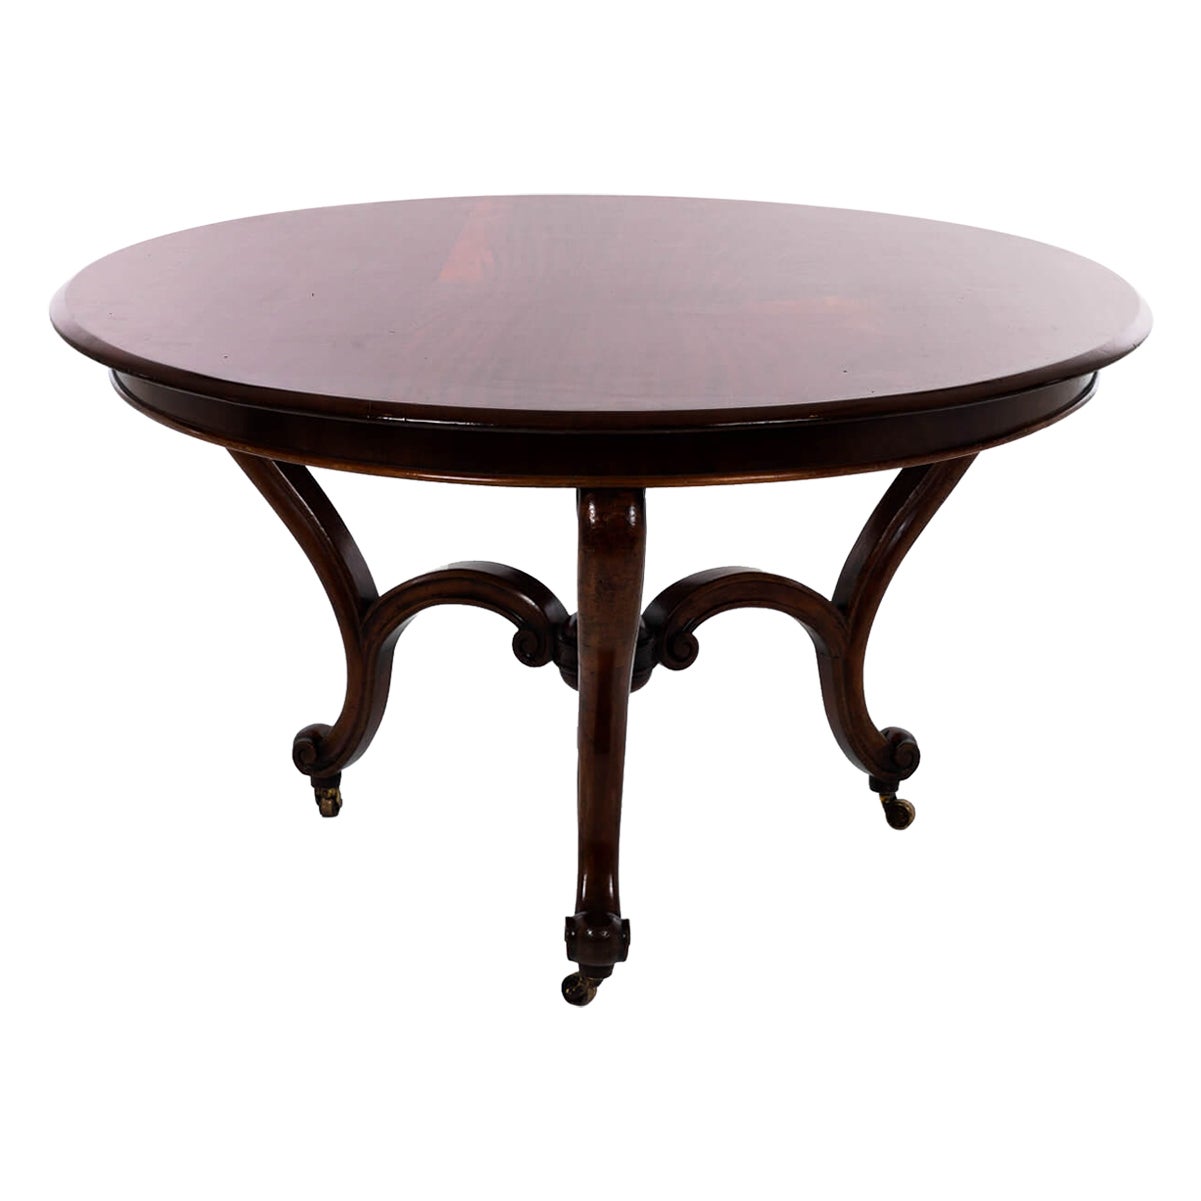 Mid-19th Century Fruitwood Centre Table, circa 1850 For Sale